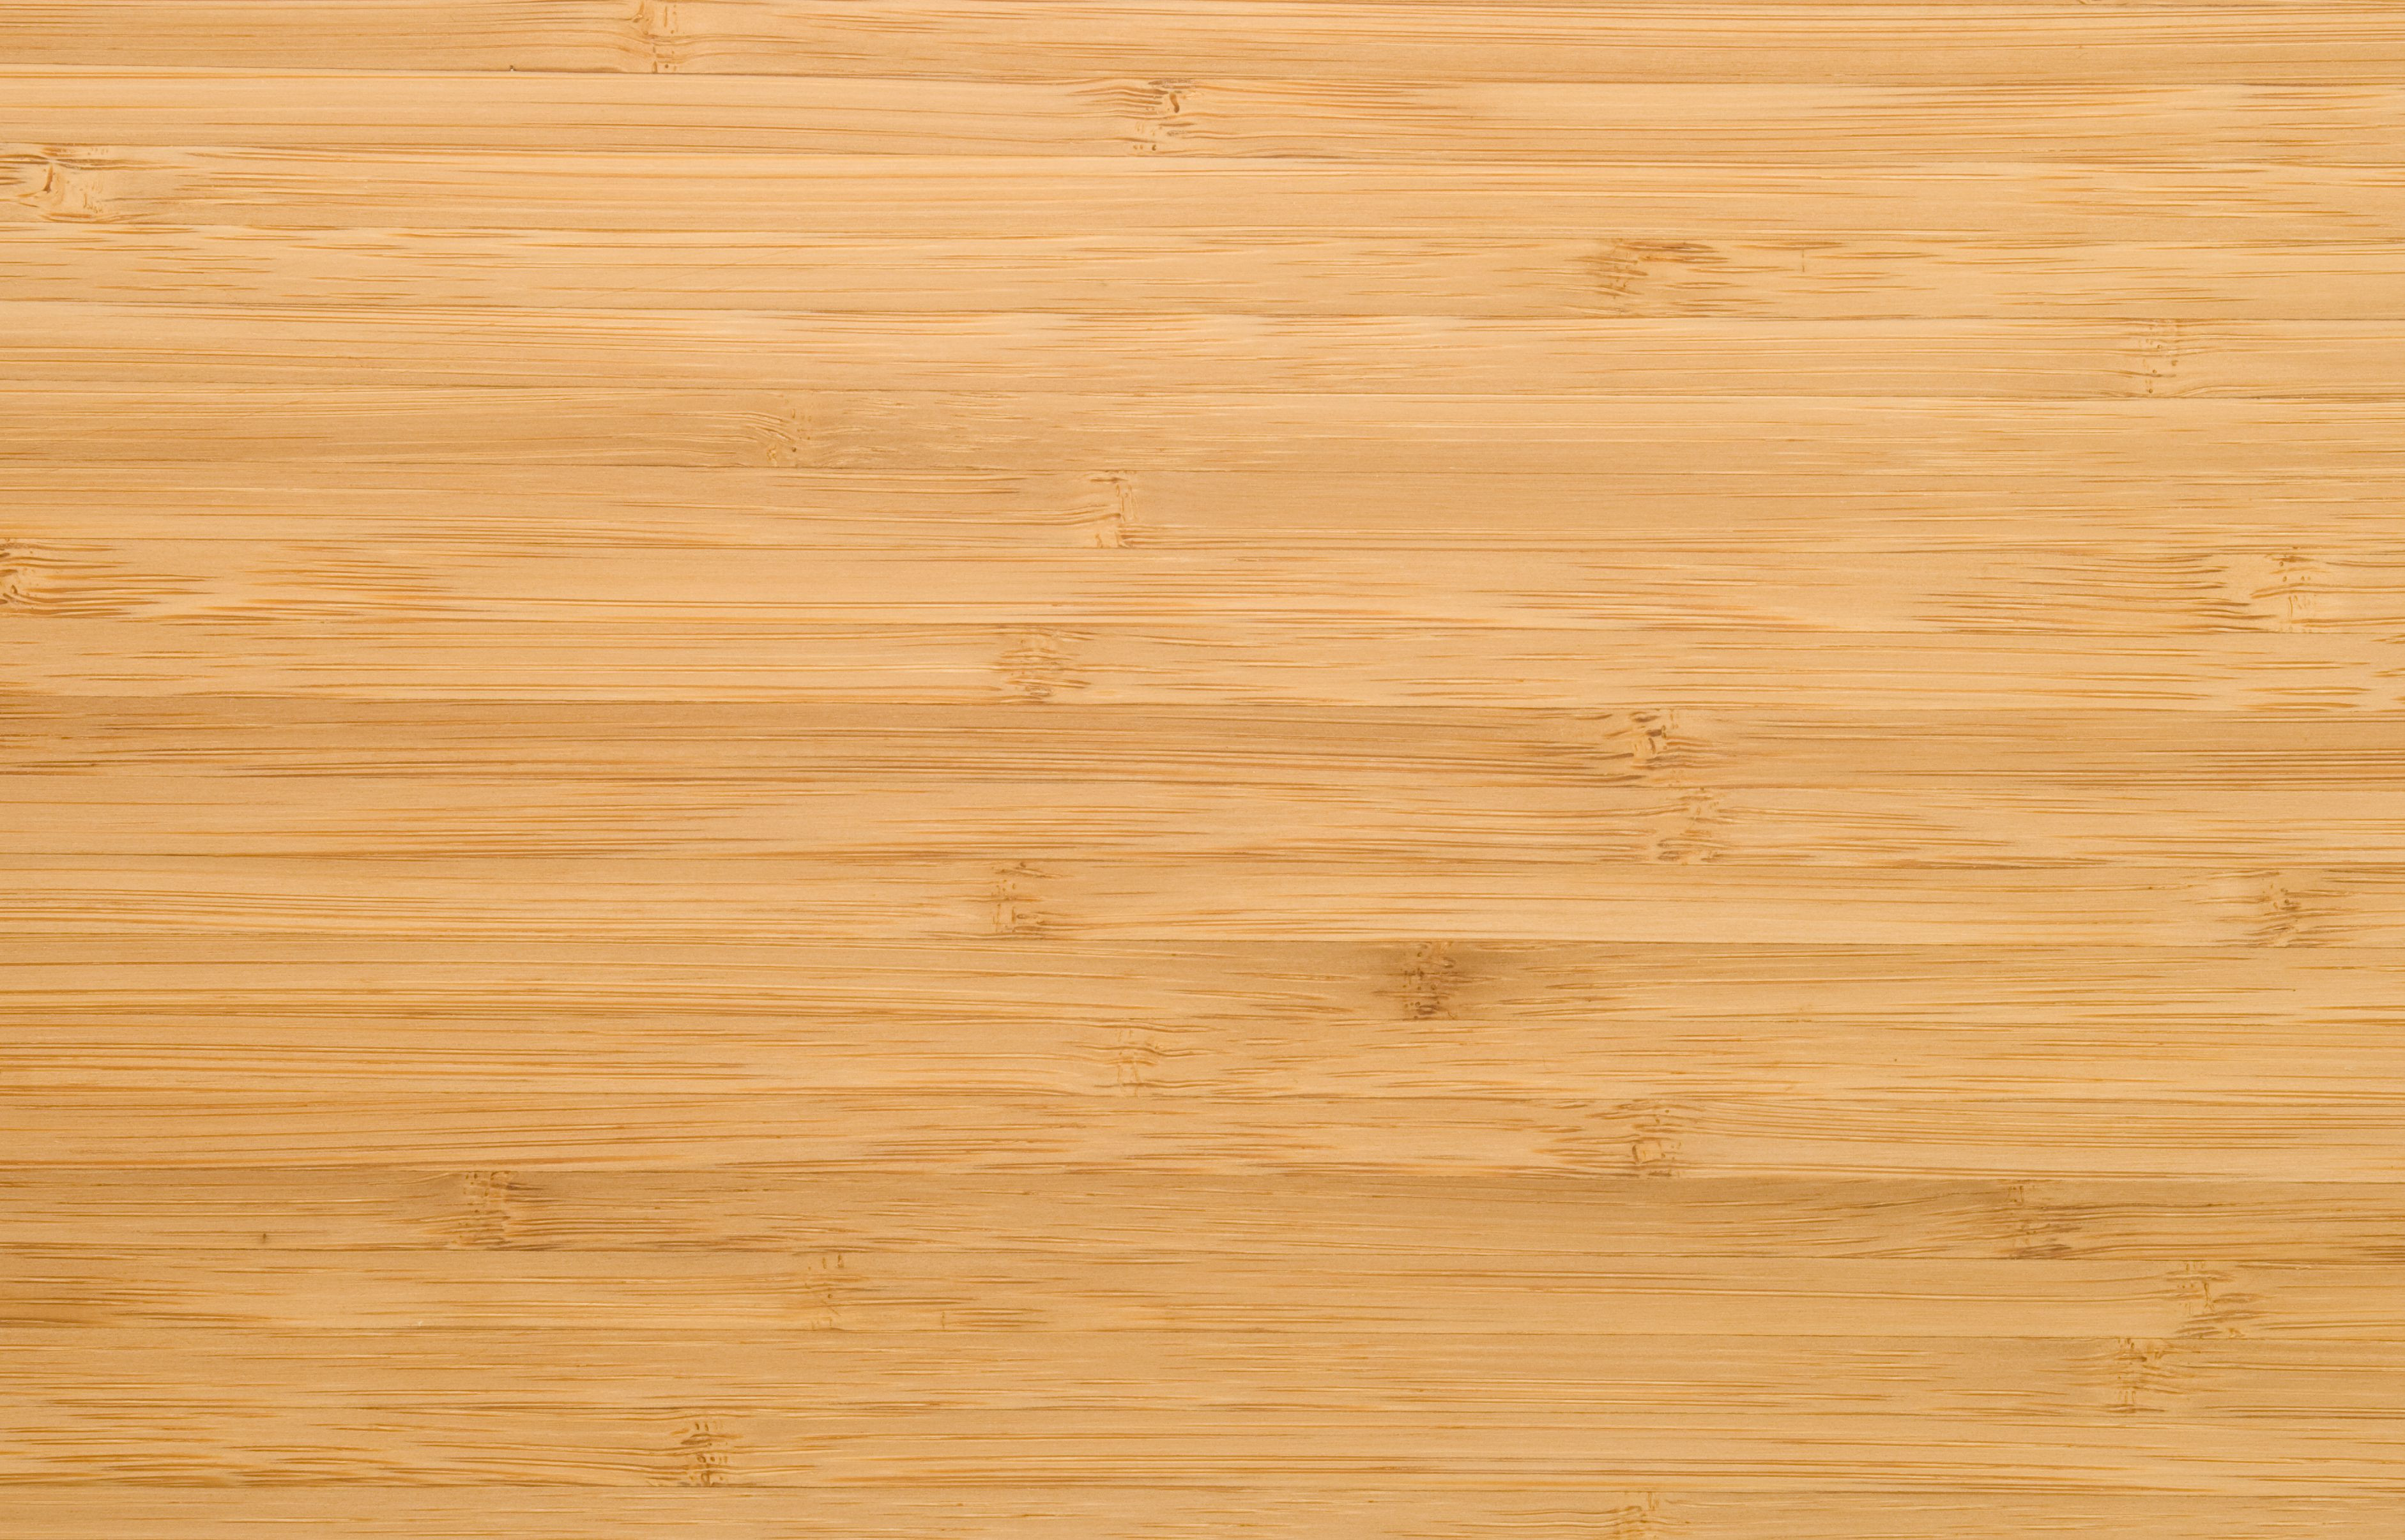 24 Ideal Hardwood Floor Care Products 2024 free download hardwood floor care products of can you use a wet mop on bamboo floors pertaining to natural bamboo plank 94259870 59aeefd4519de20010d5c648